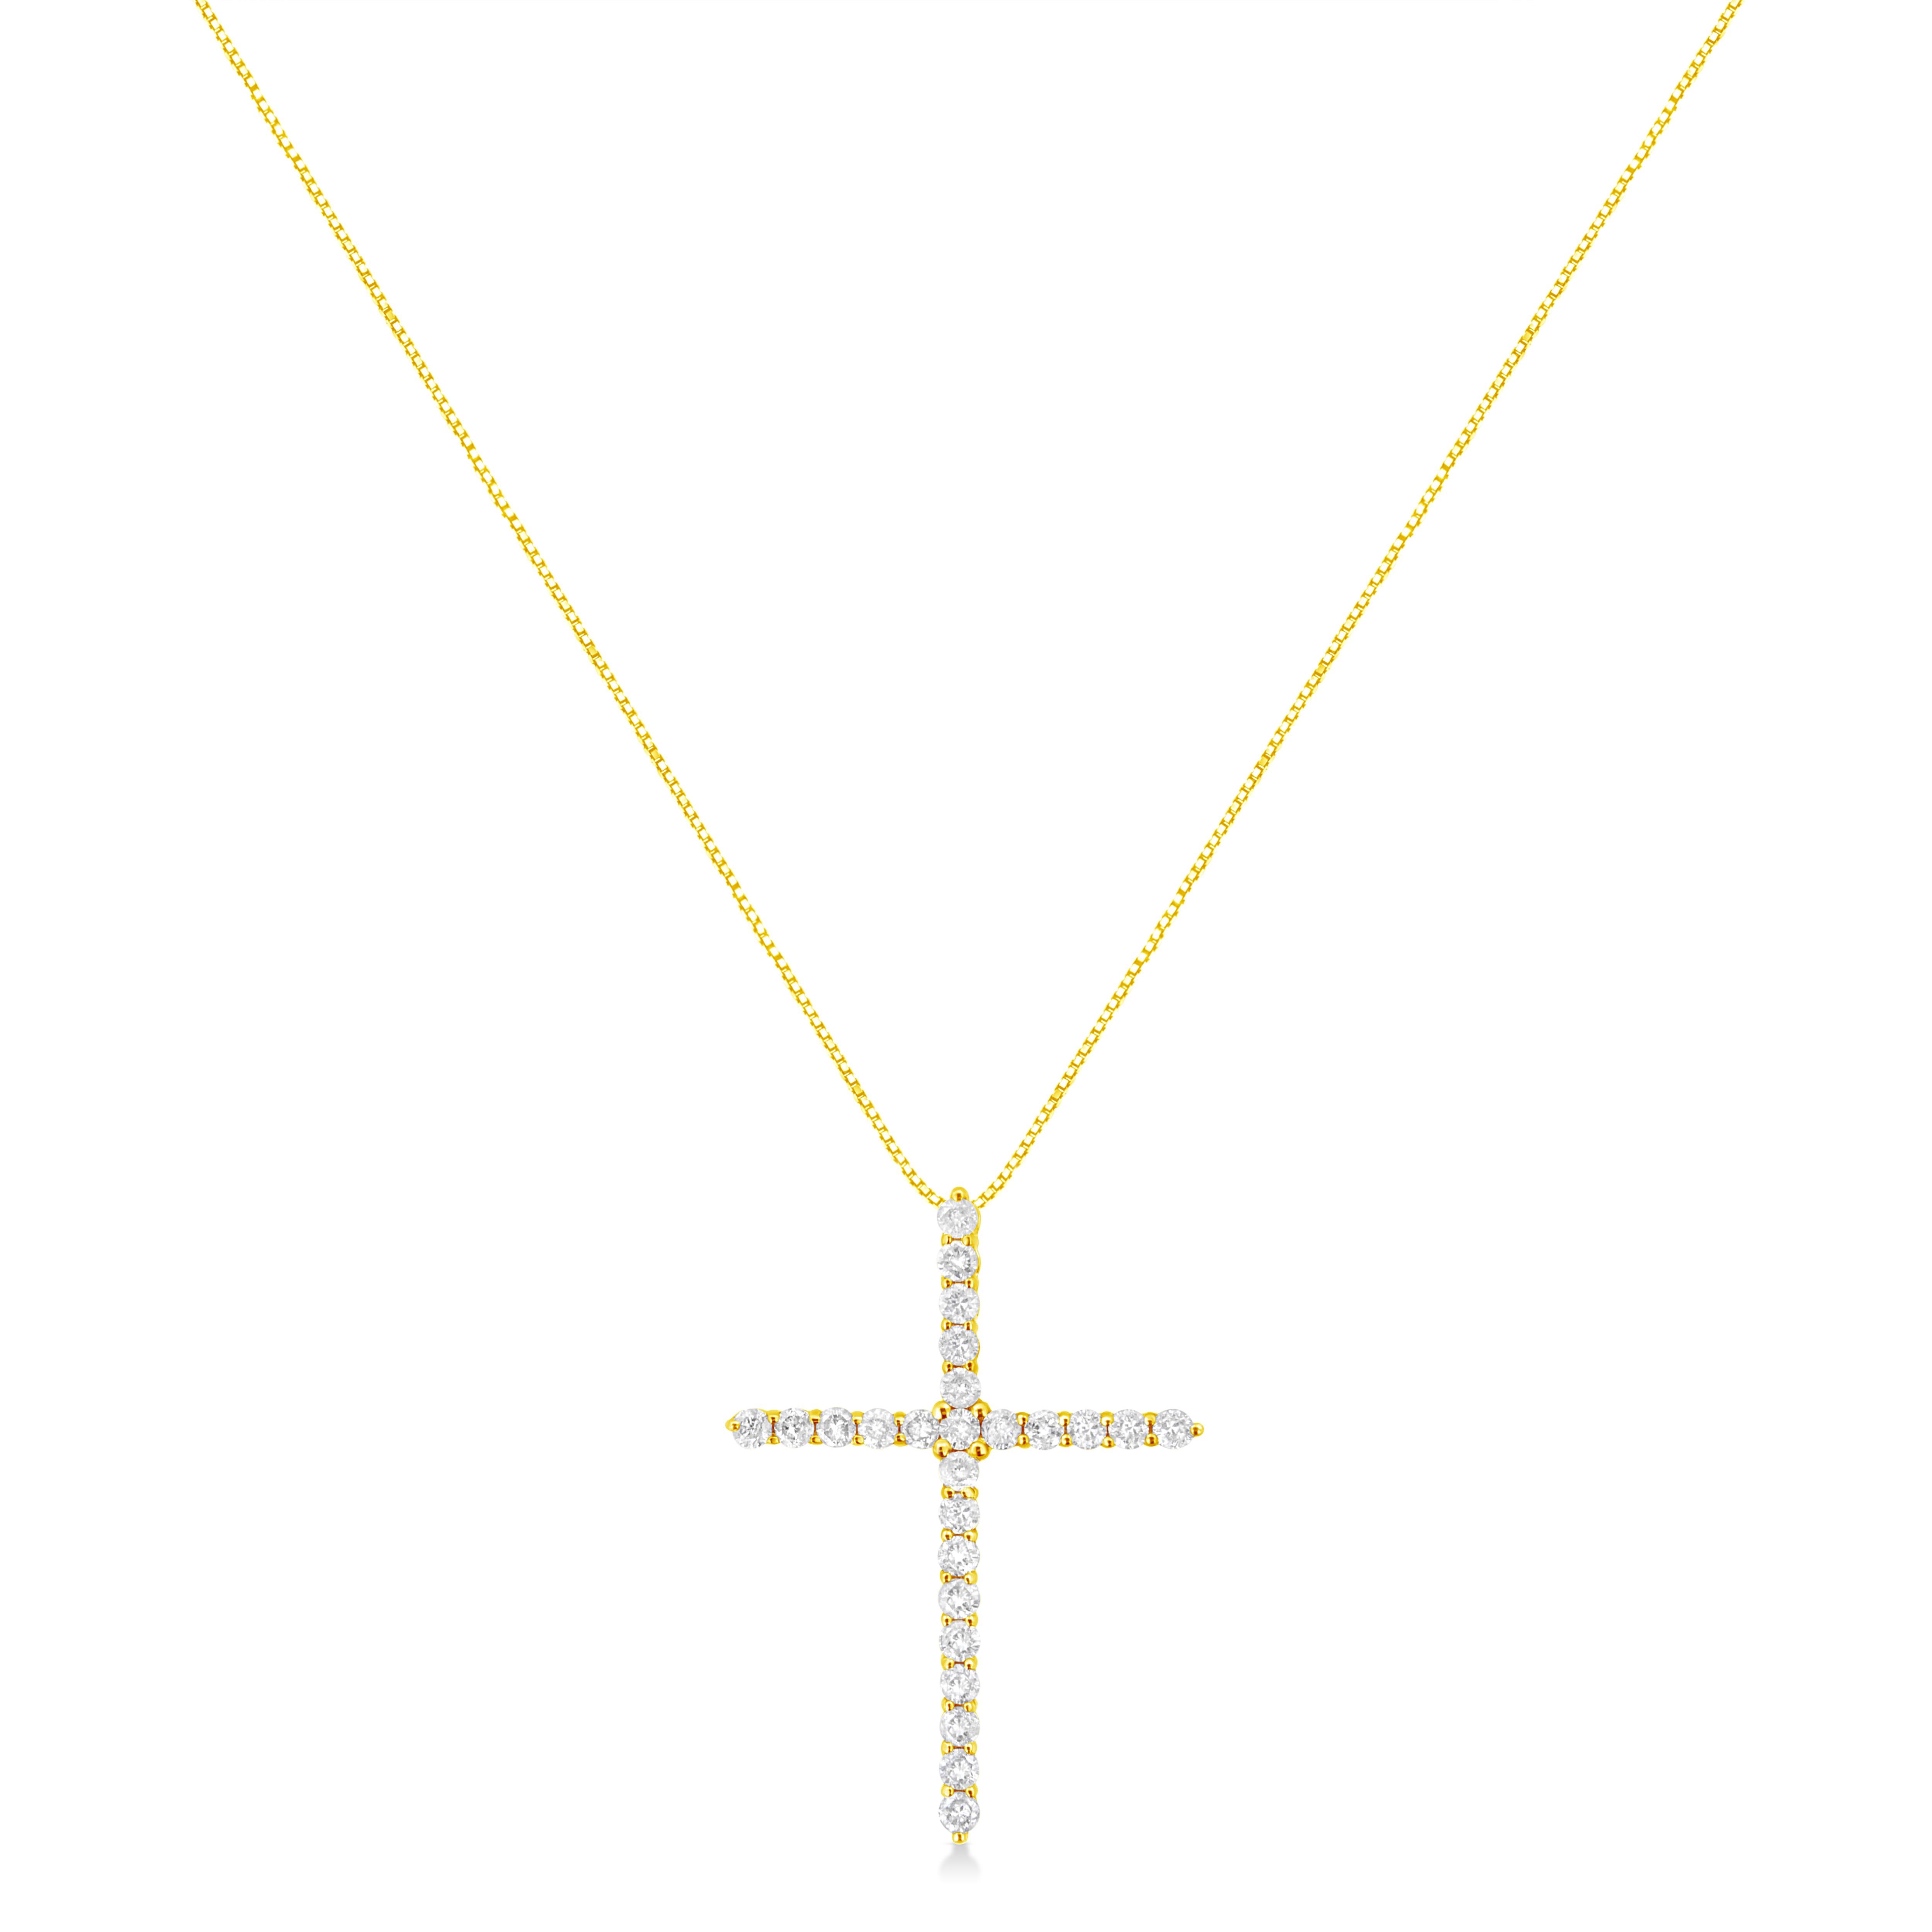 This beautiful piece of jewelry is not only a symbol of devotion and faith but also a true work of art. This gorgeous 10K yellow gold plated .925 sterling silver pendant necklace features round, brilliant cut diamonds in a cross design. This diamond